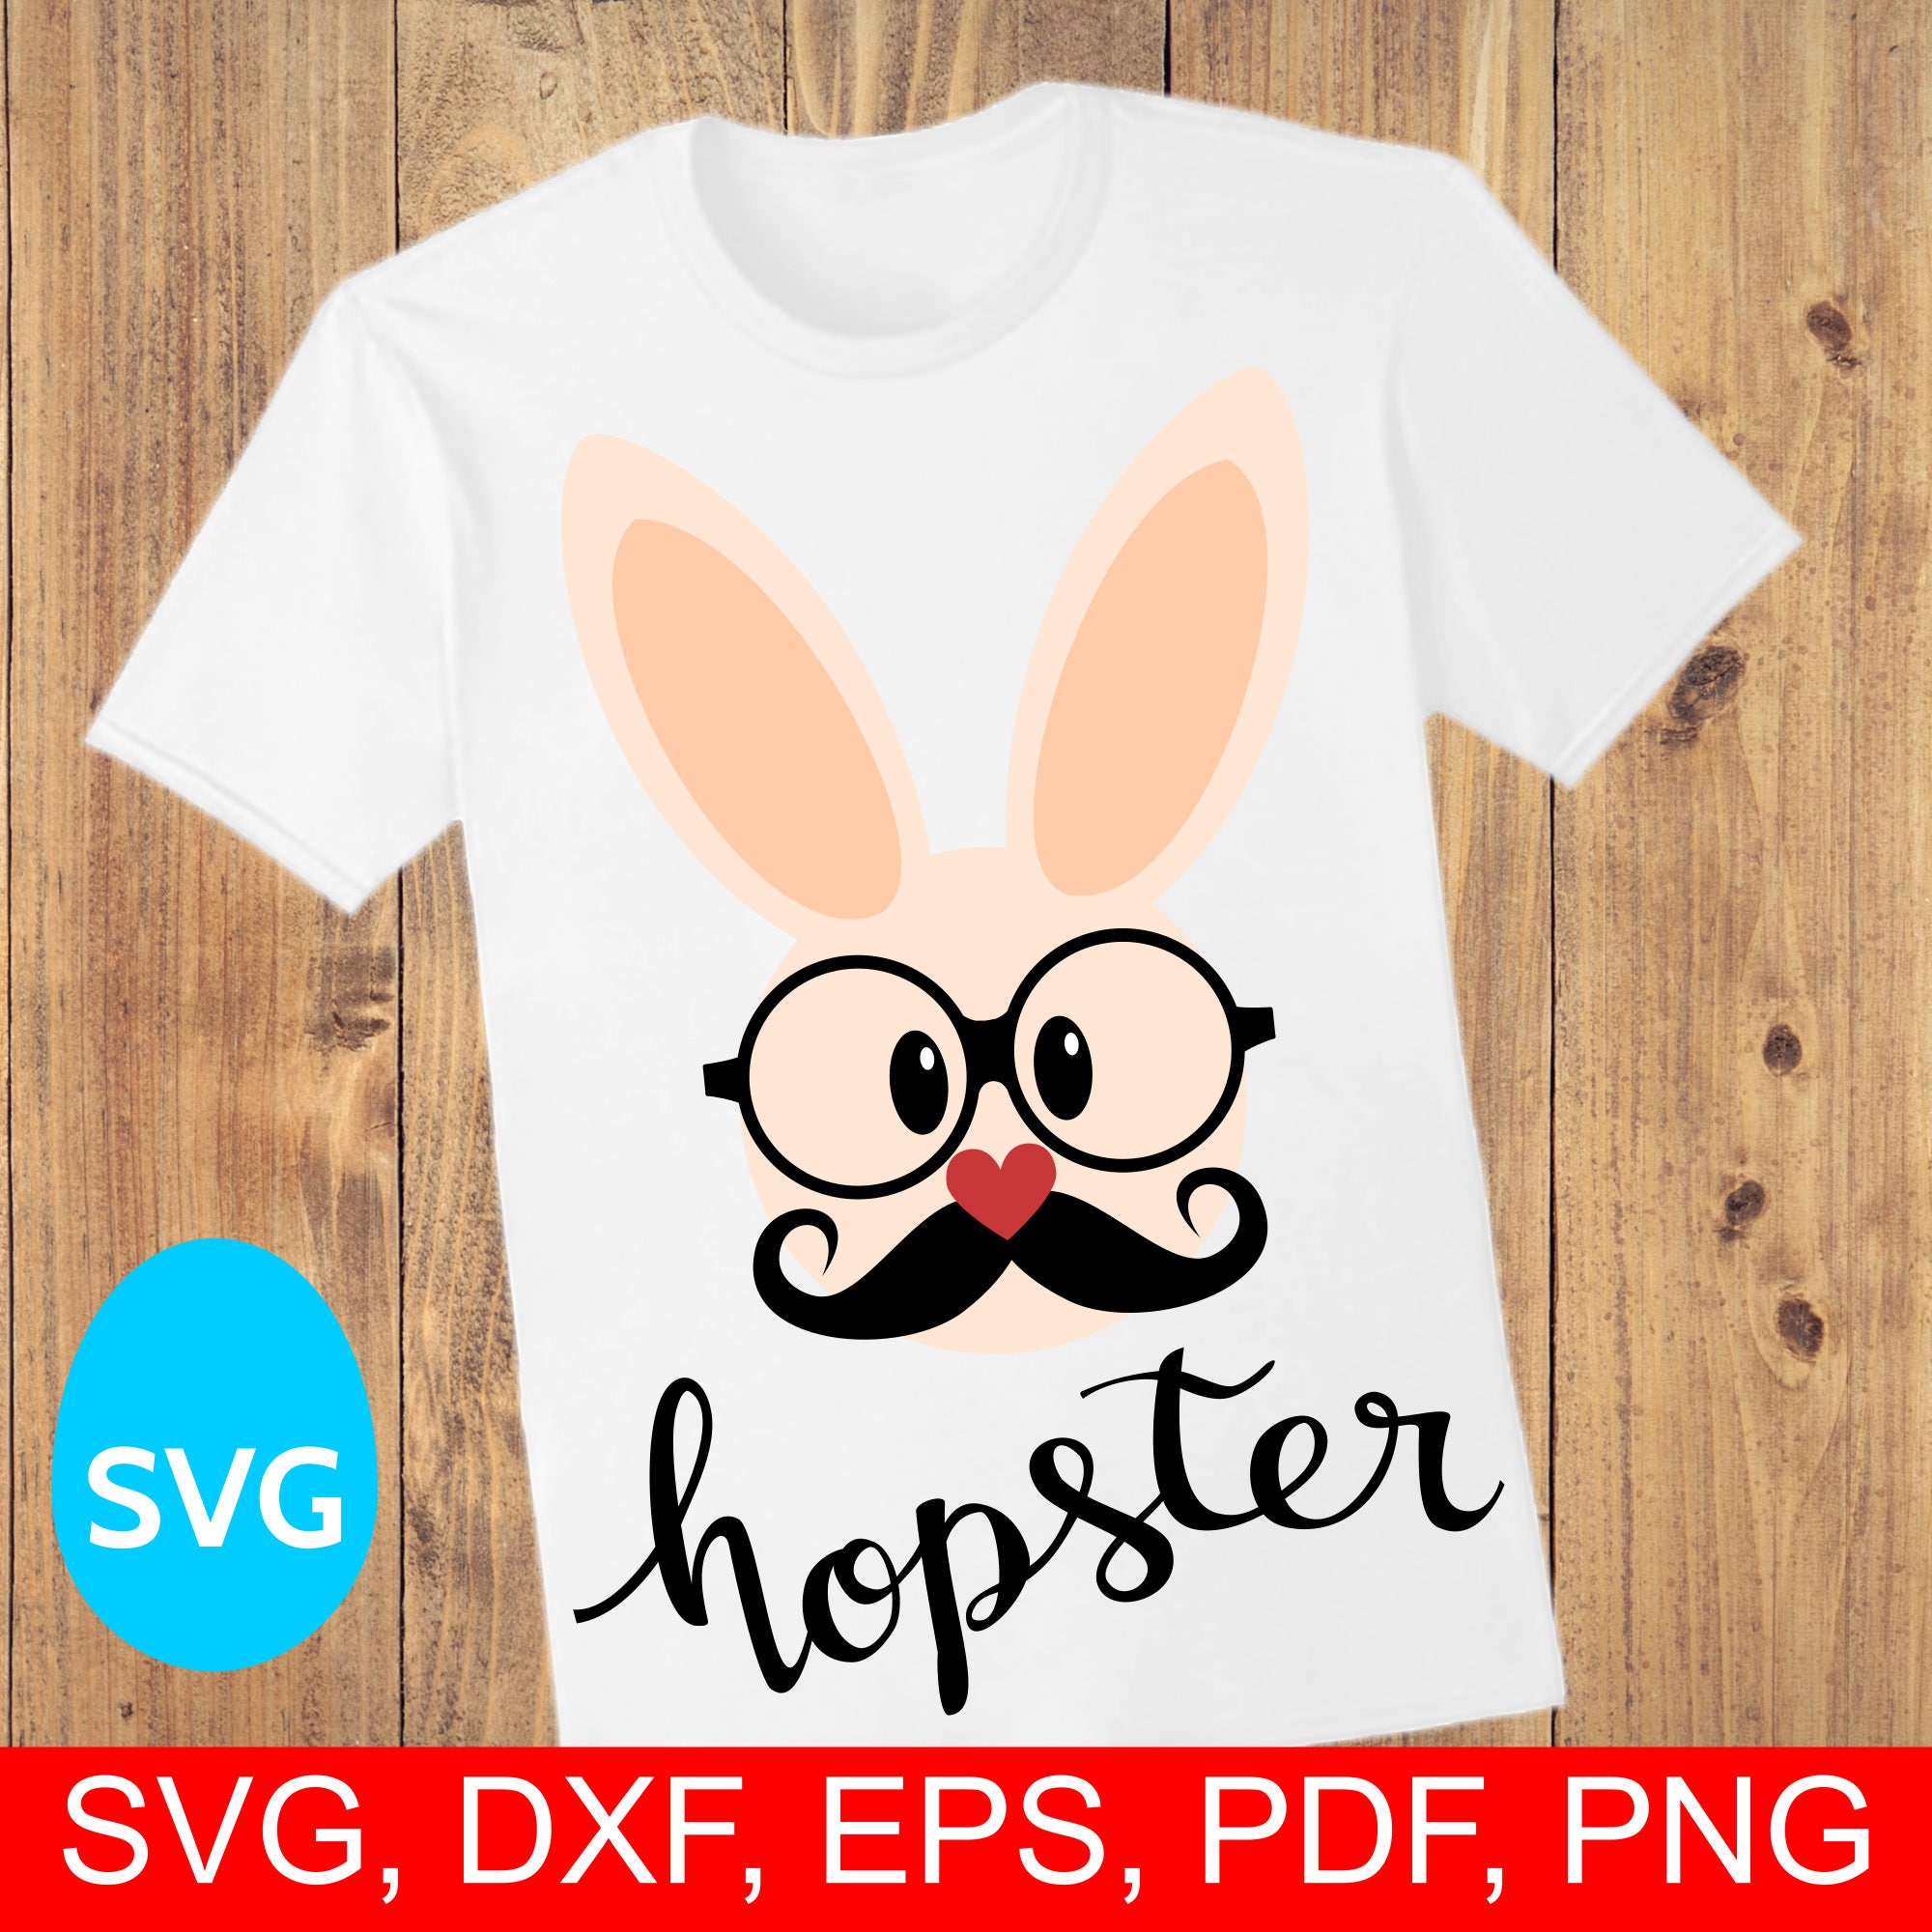 Download Mr Easter Hopster Bunny Svg File Hipster Bunny Clipart With Mustache And Glasses